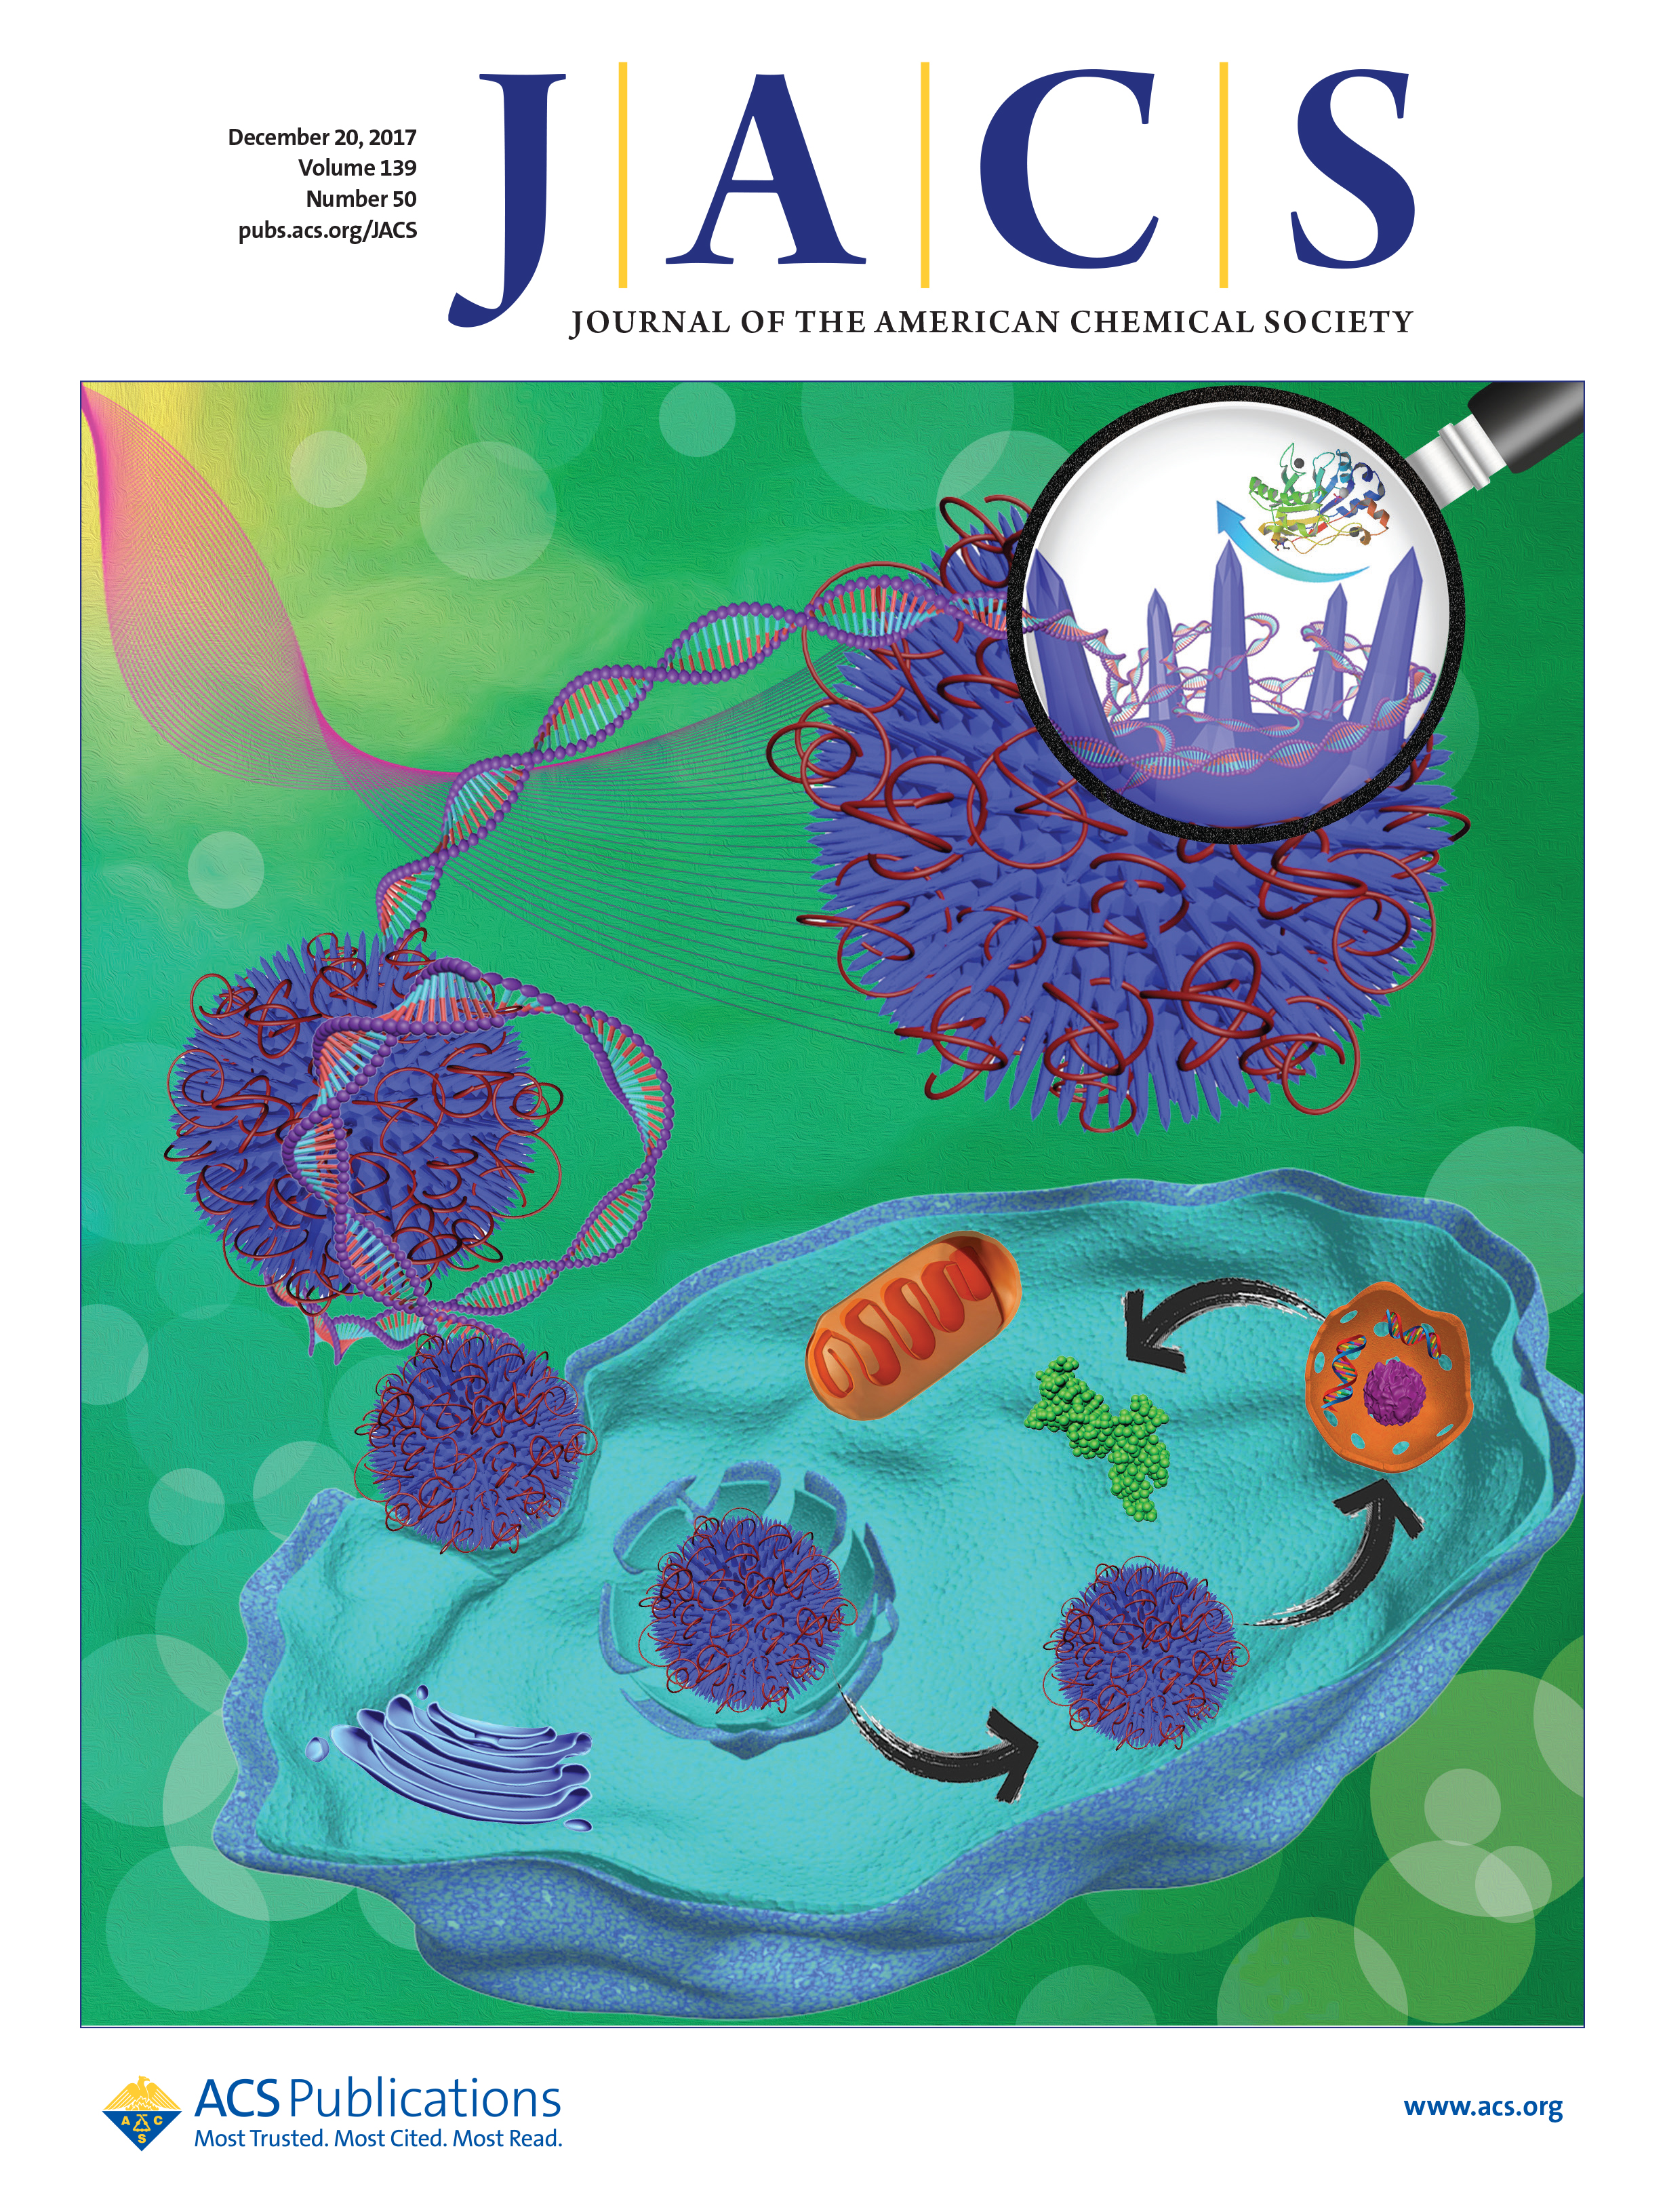 Journal of the American Chemical Society (JACS) cover featuring the work.